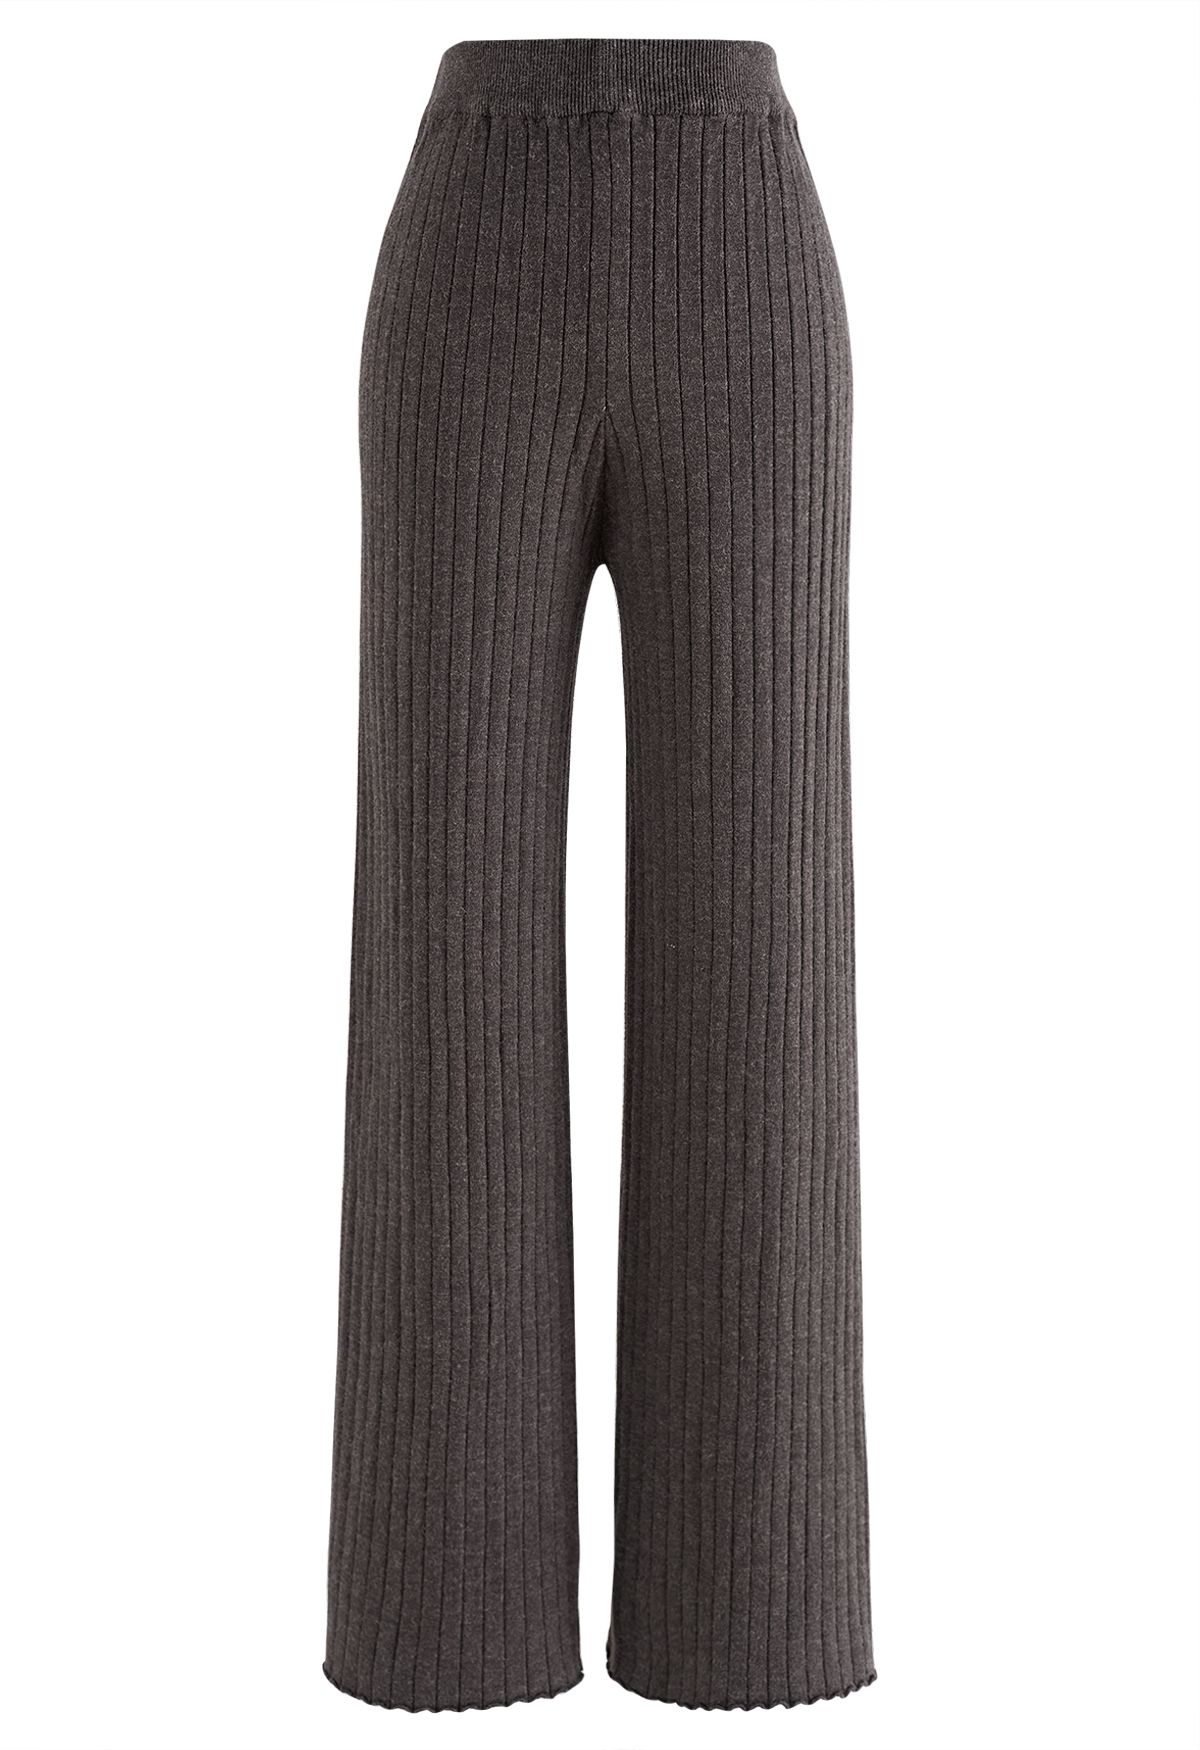 Ribbed Straight Leg Knit Pants in Smoke - Retro, Indie and Unique 